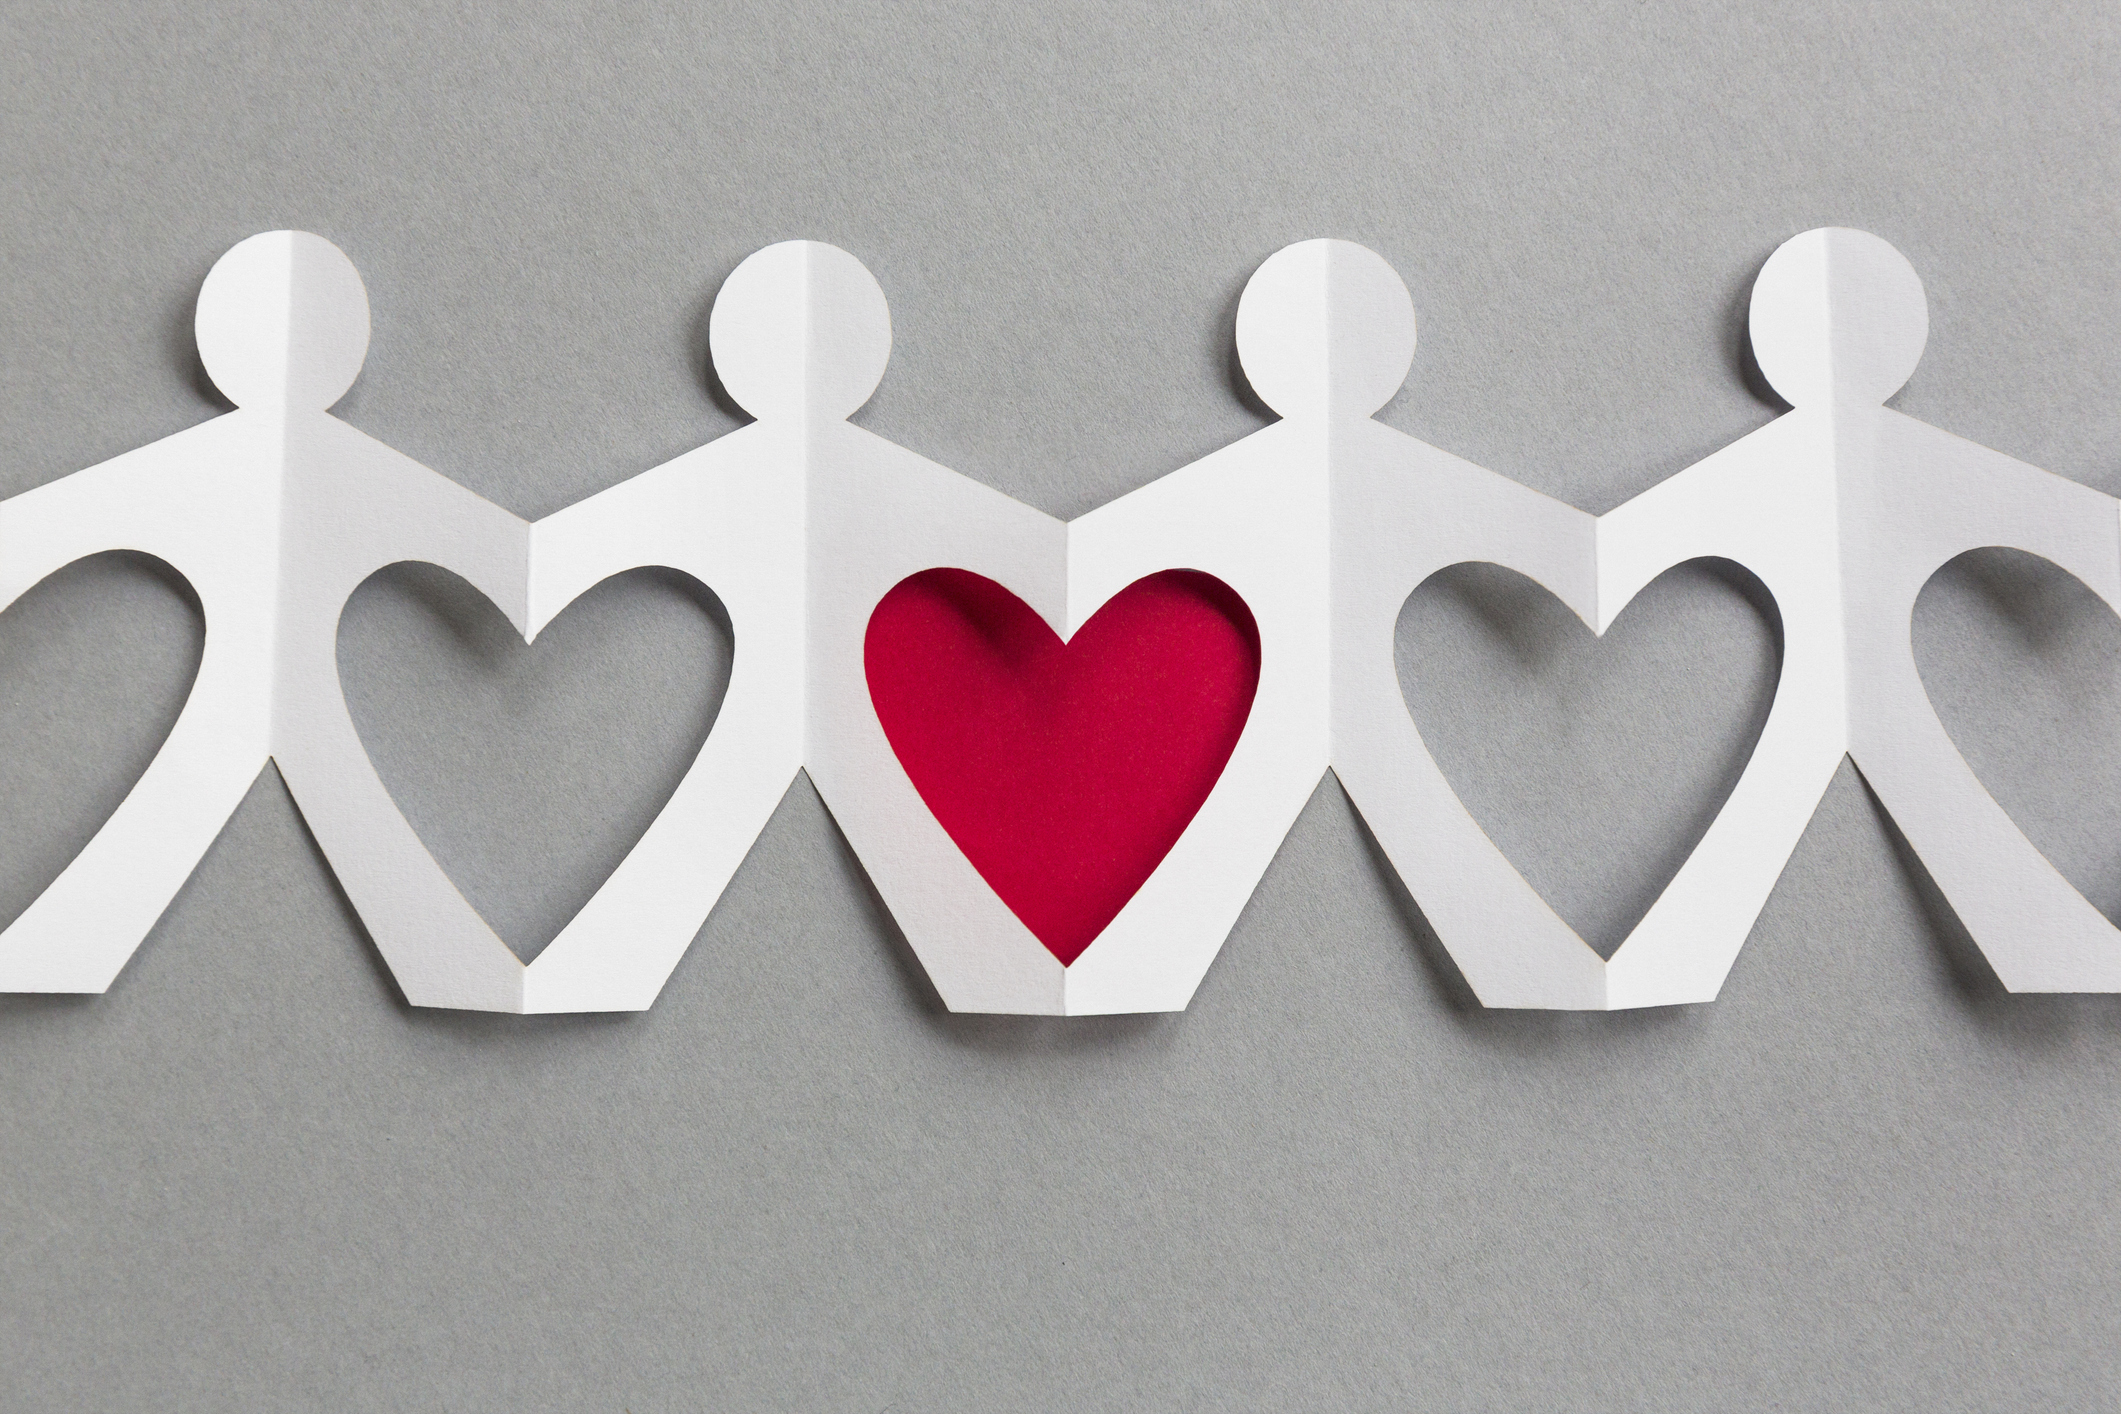 Line of paper cut-out figures forming heart shapes